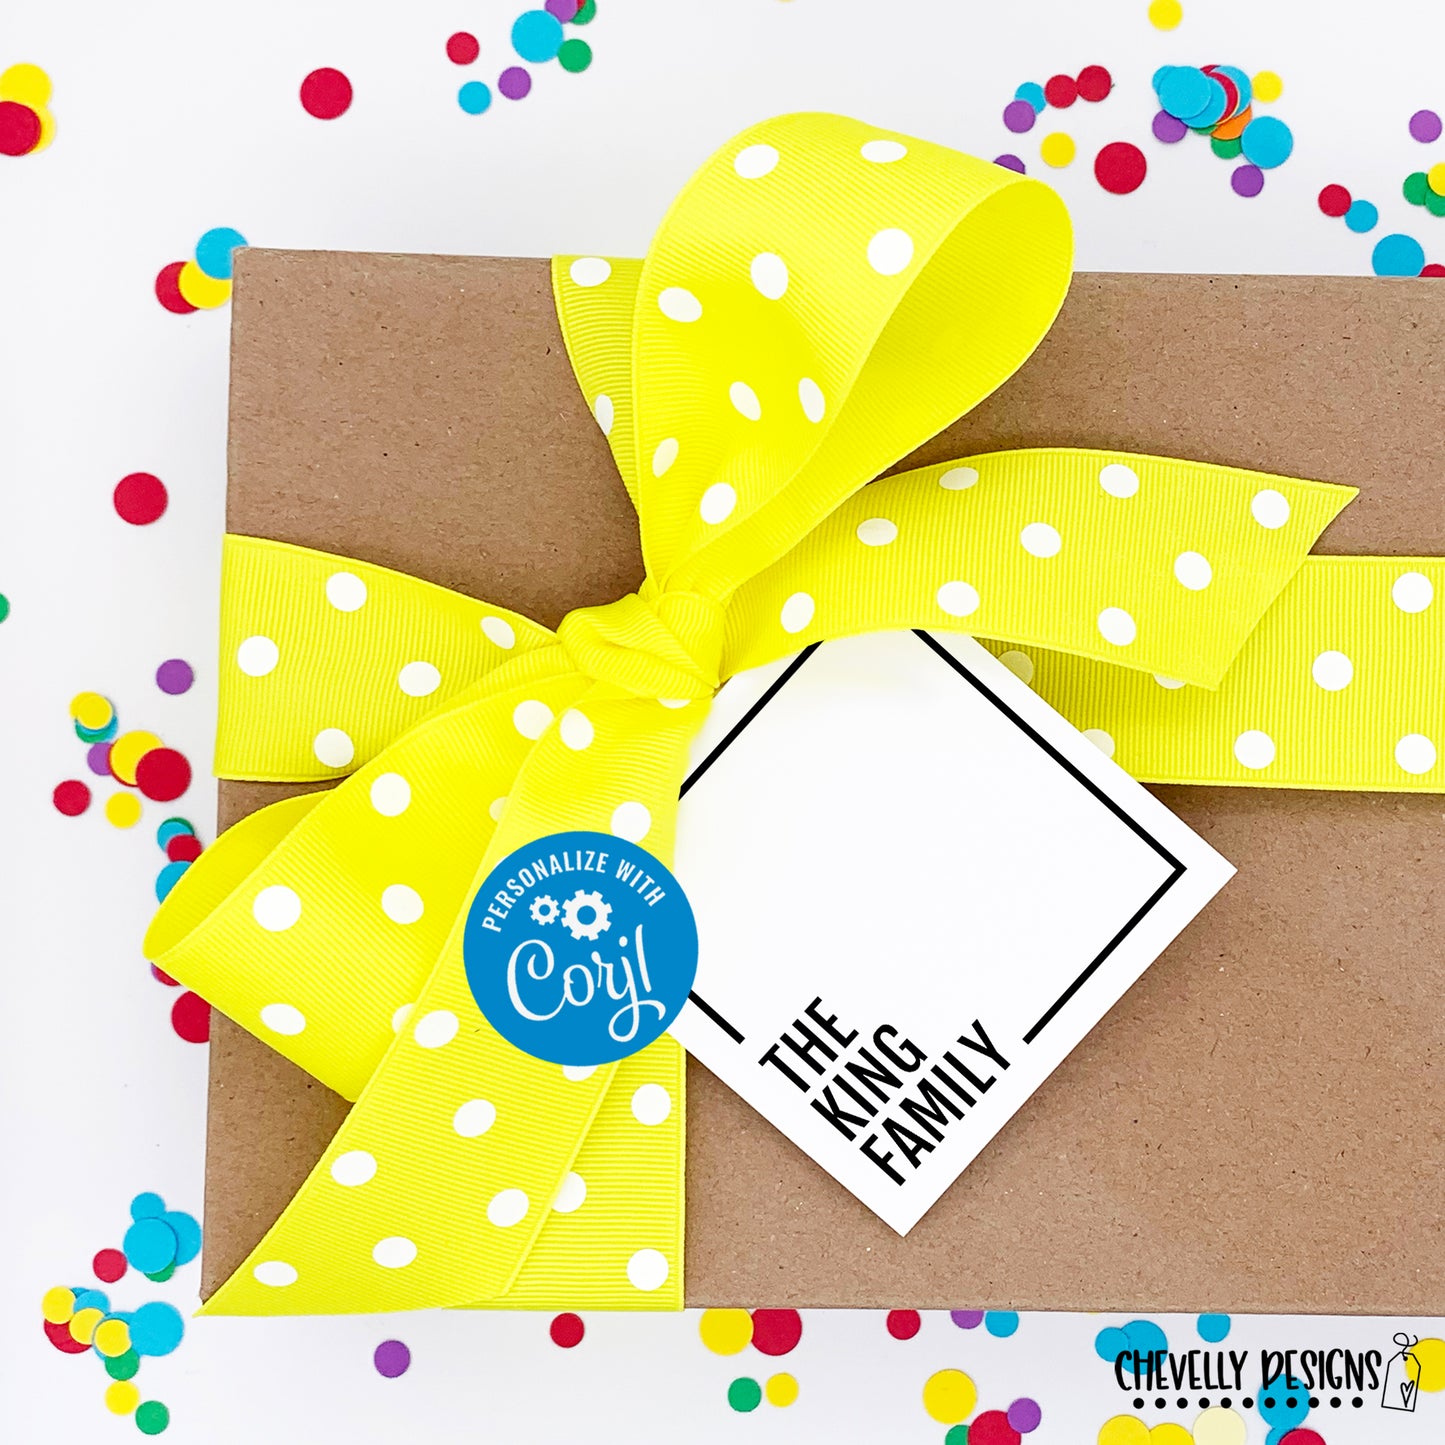 EDITABLE - Printable From the Family Gift Tags - Digital File